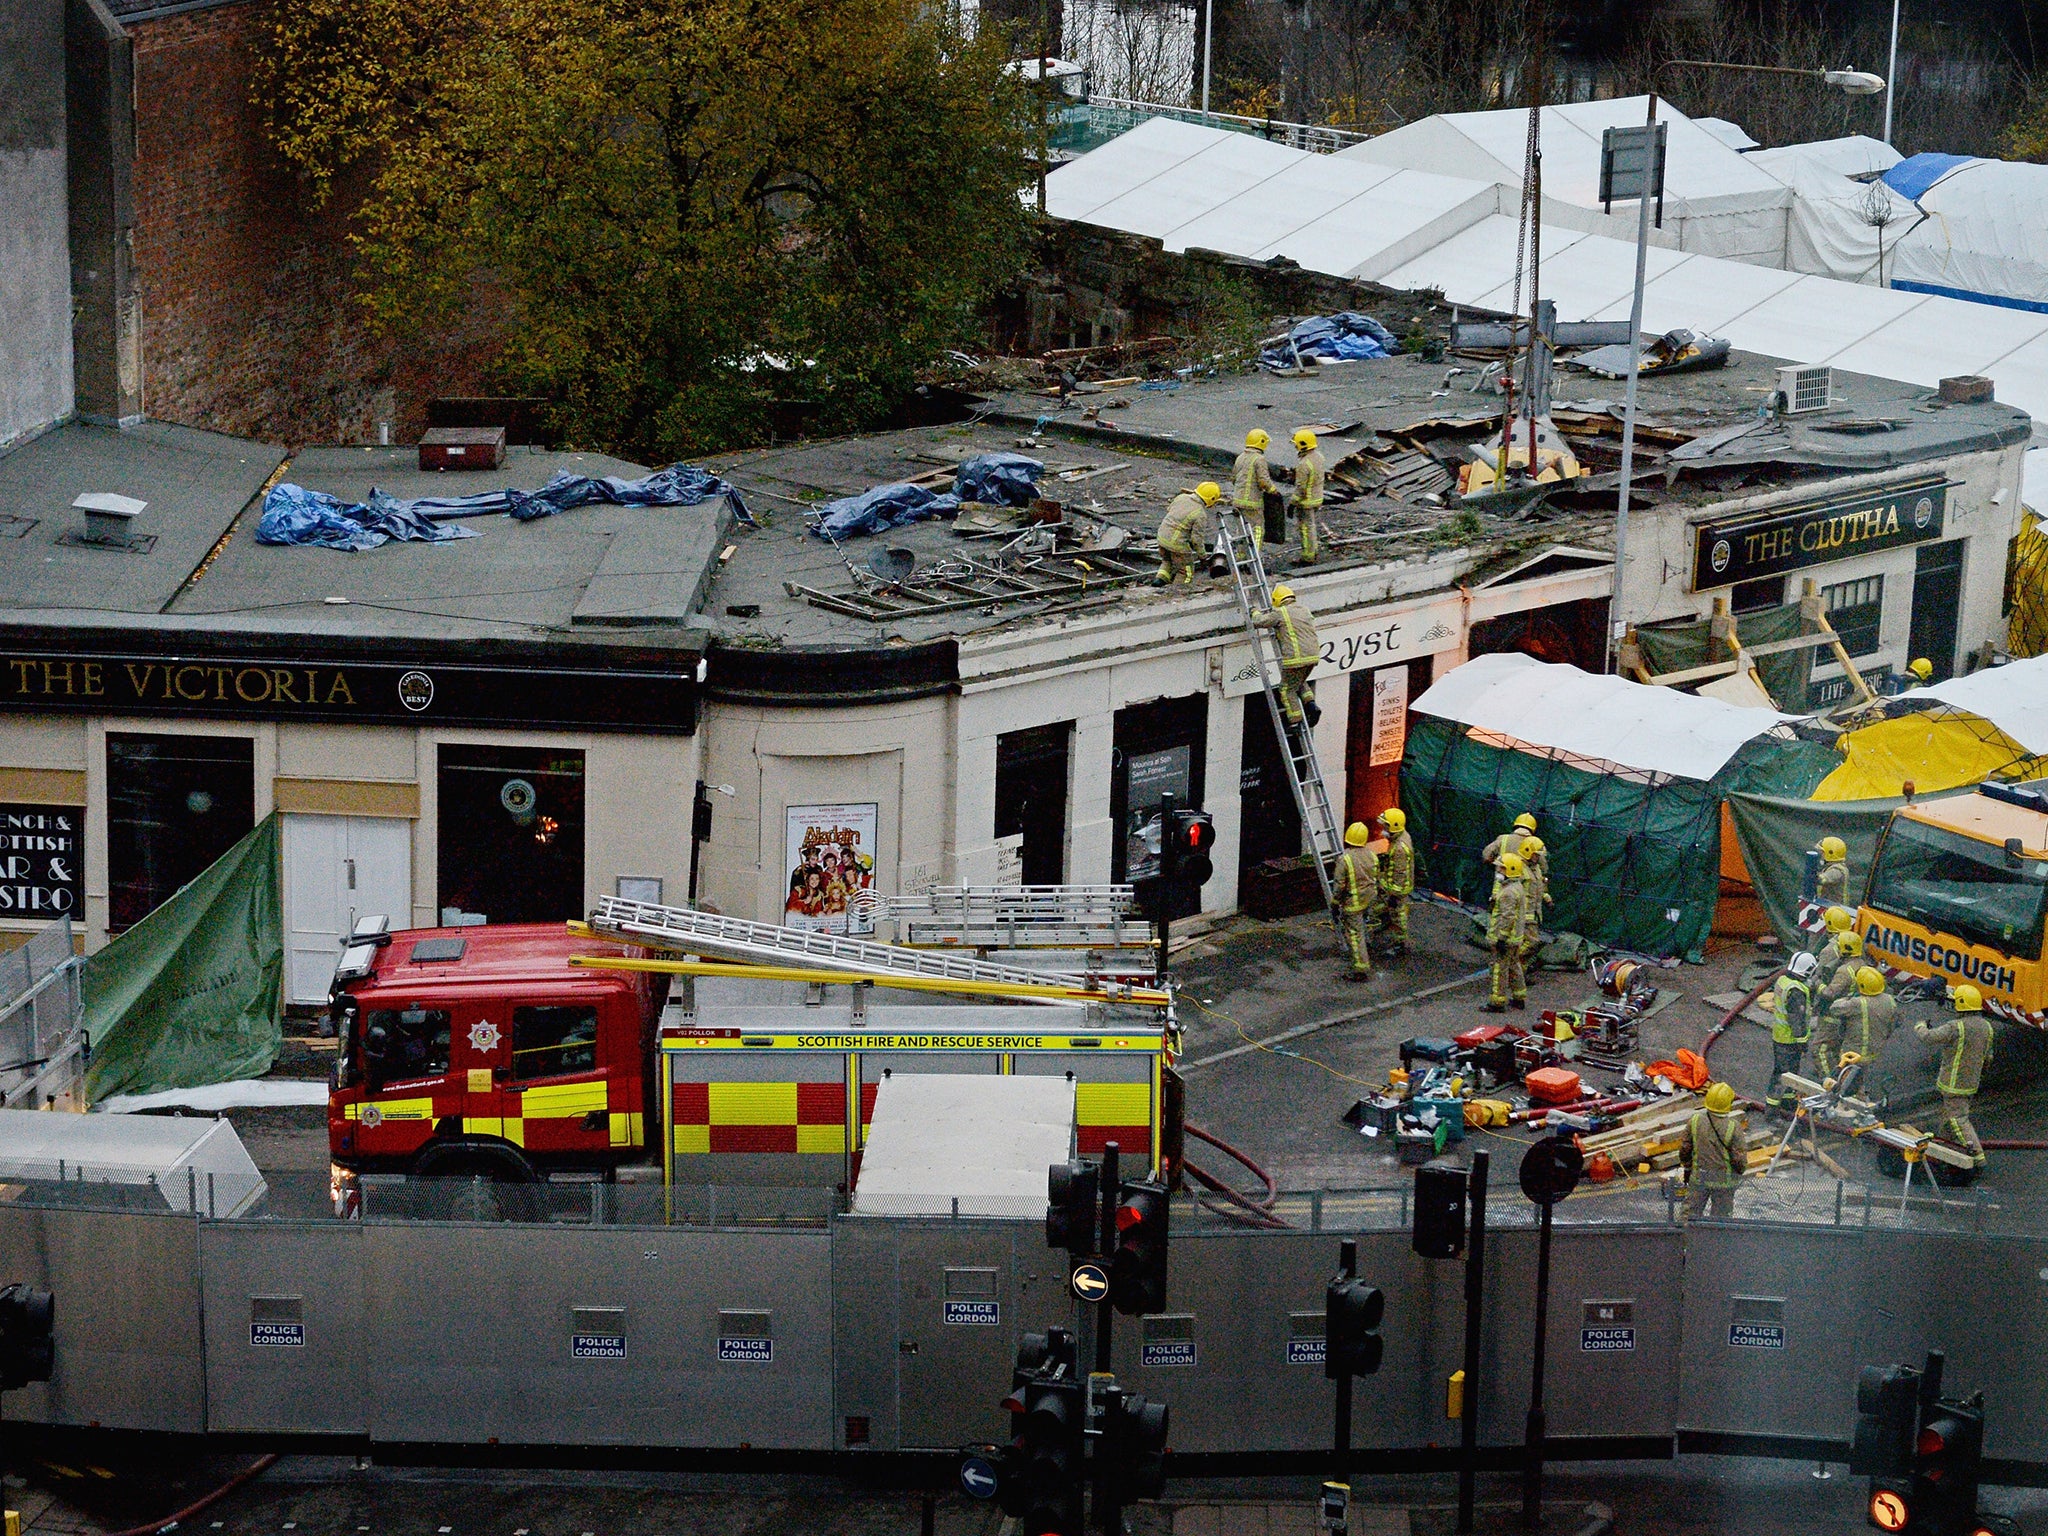 Nine people were killed when a helicopter crashed into The Clutha Pub in 2013